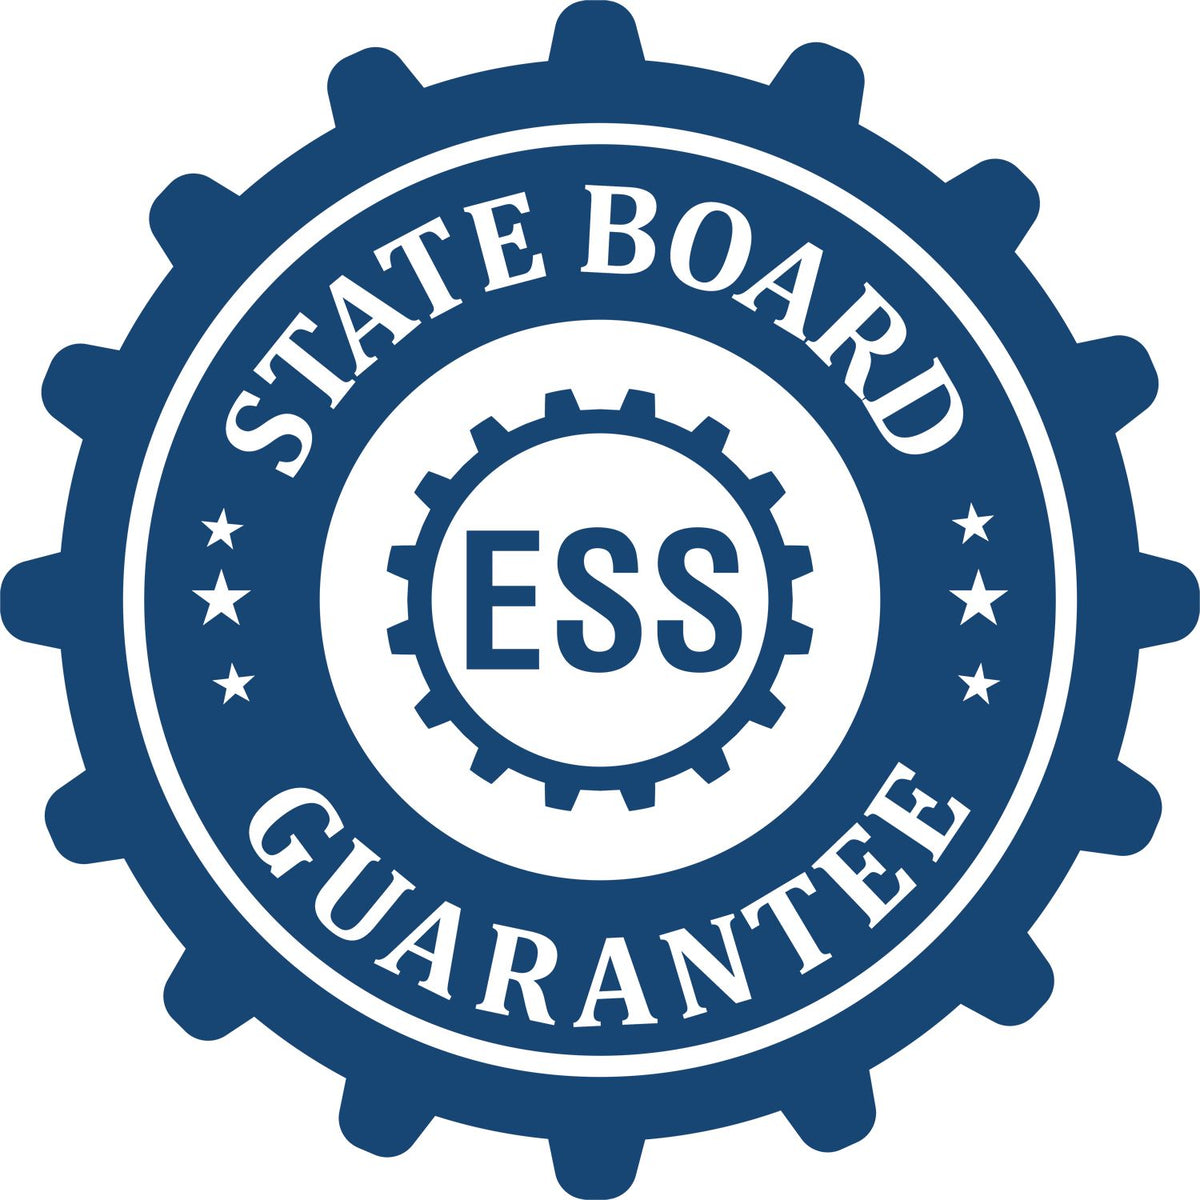 Geologist eSeal Electronic Image Stamp of Seal 3008GEO State Board Guarantee